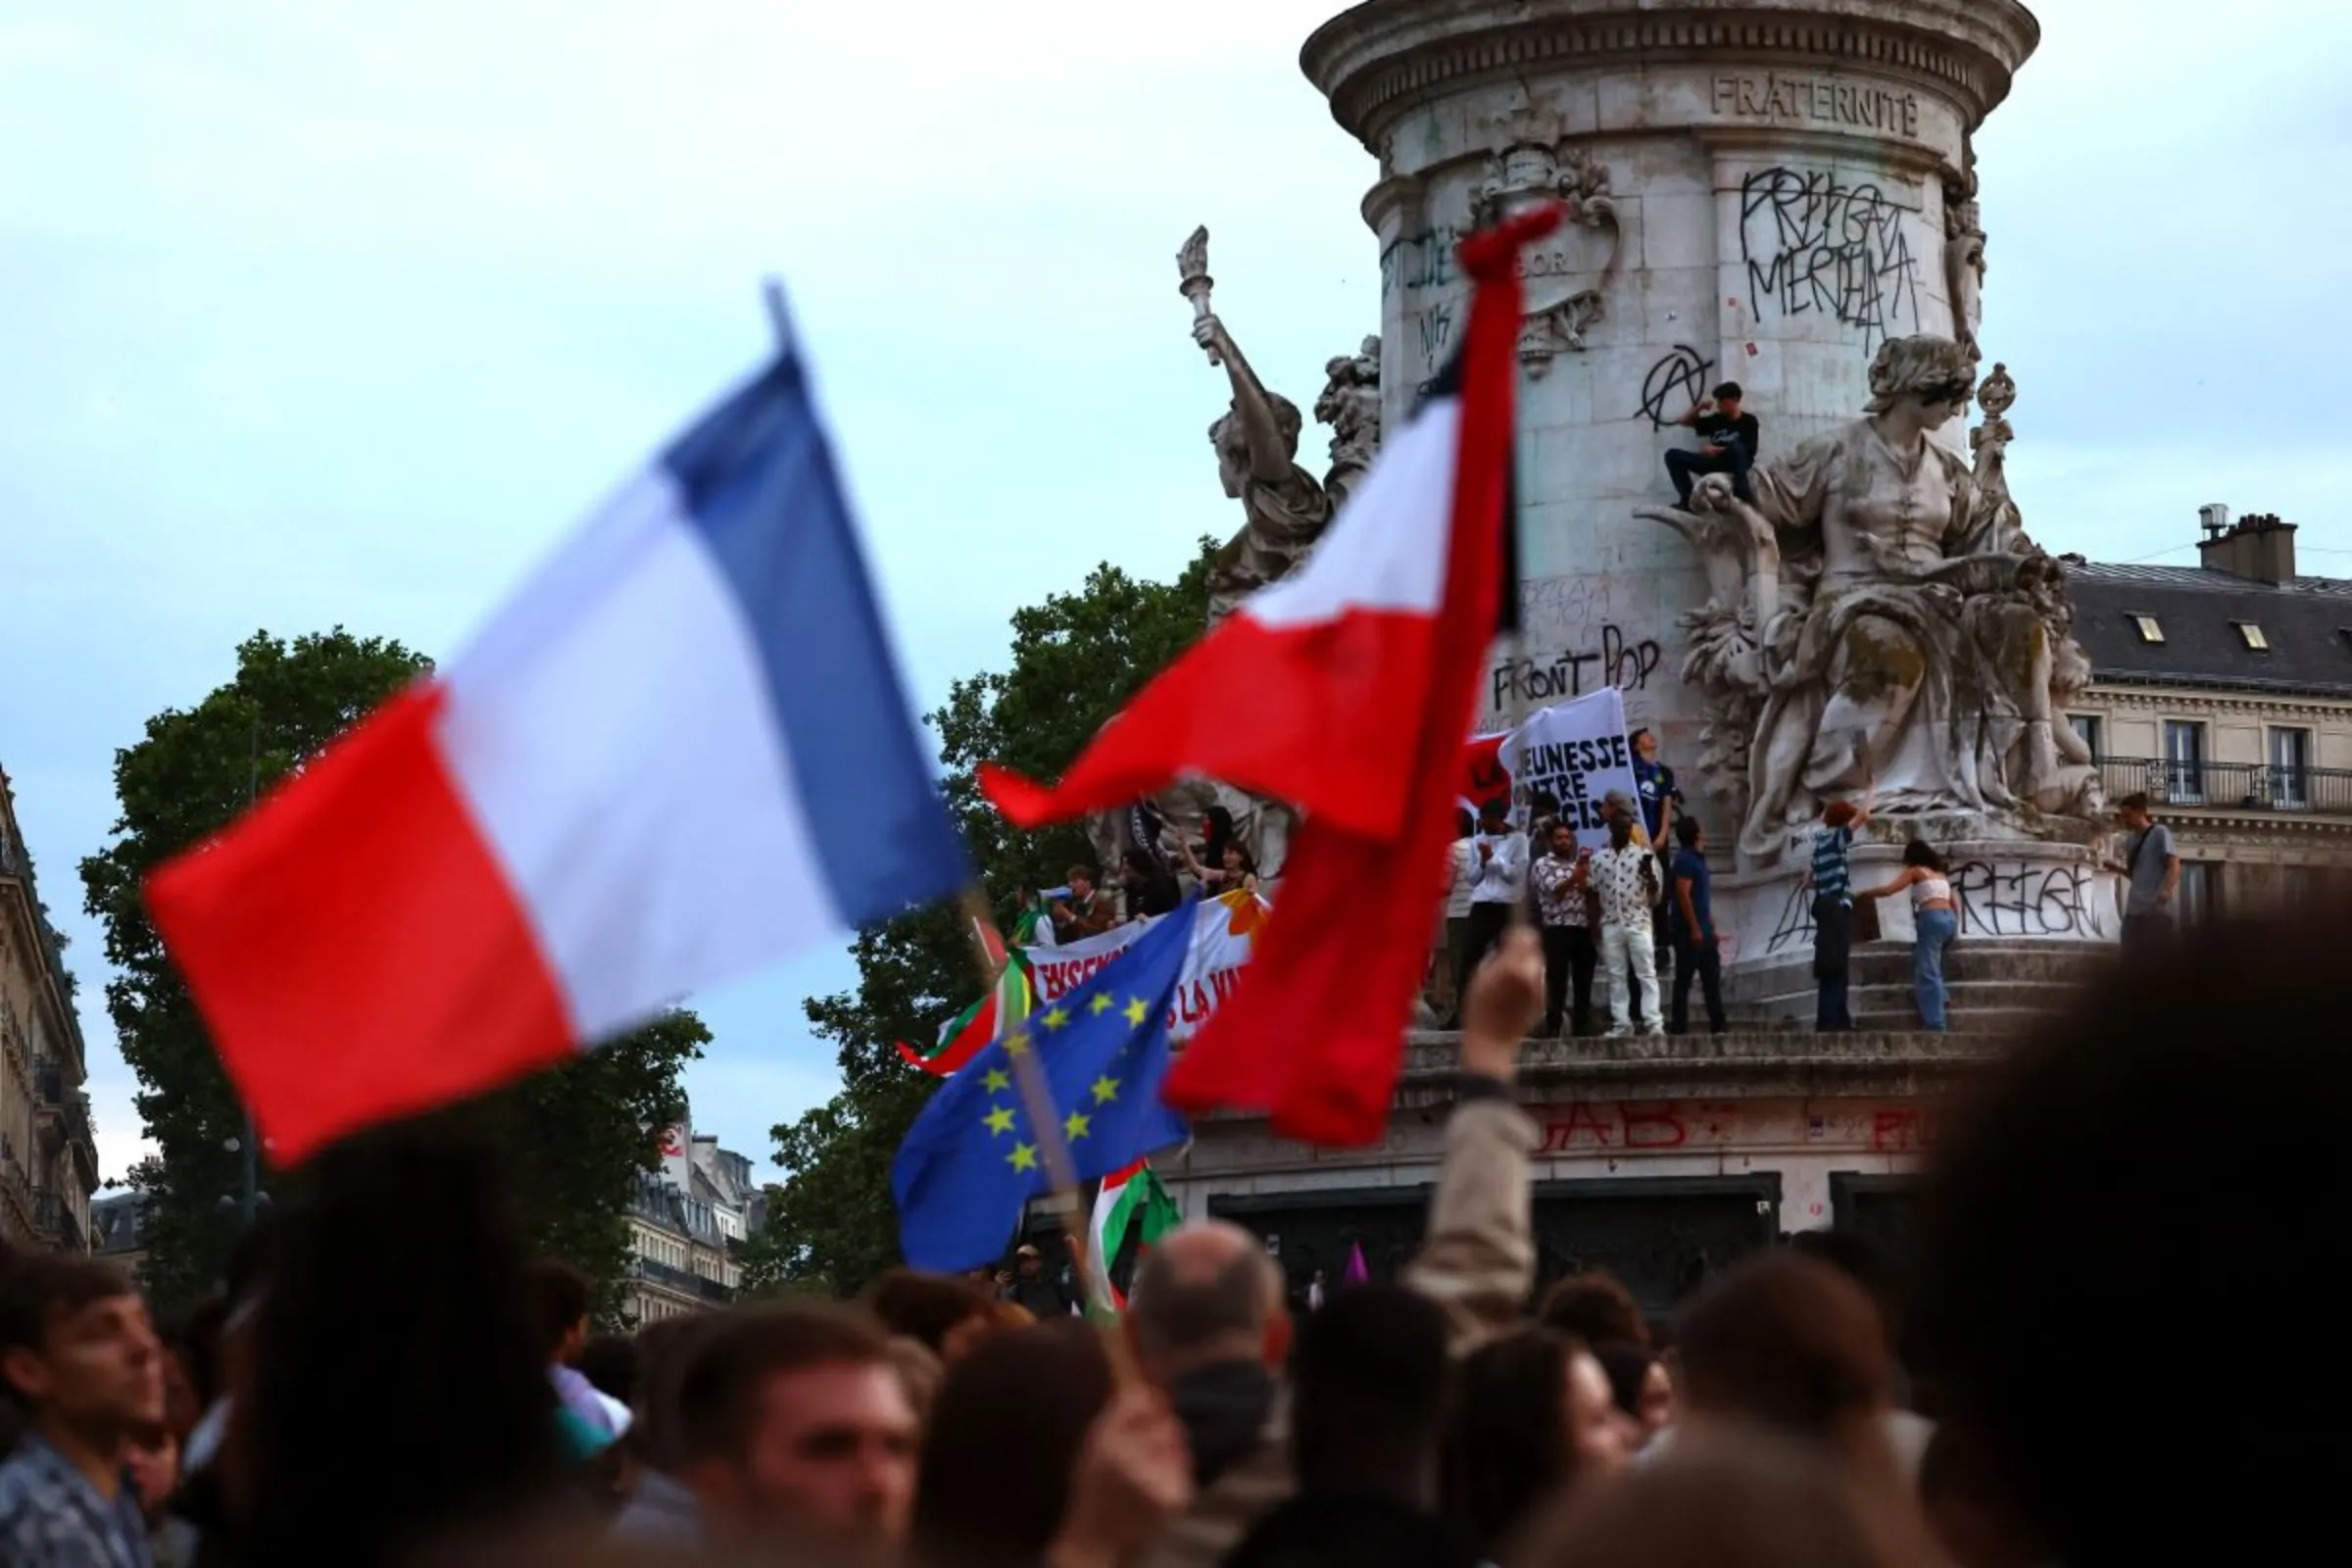 People hold French national flags as they gather to protest against the French far-right Rassemblement National (National Rally - RN) party, in Paris, France, June 30, 2024. REUTERS/Fabrizio Bensch